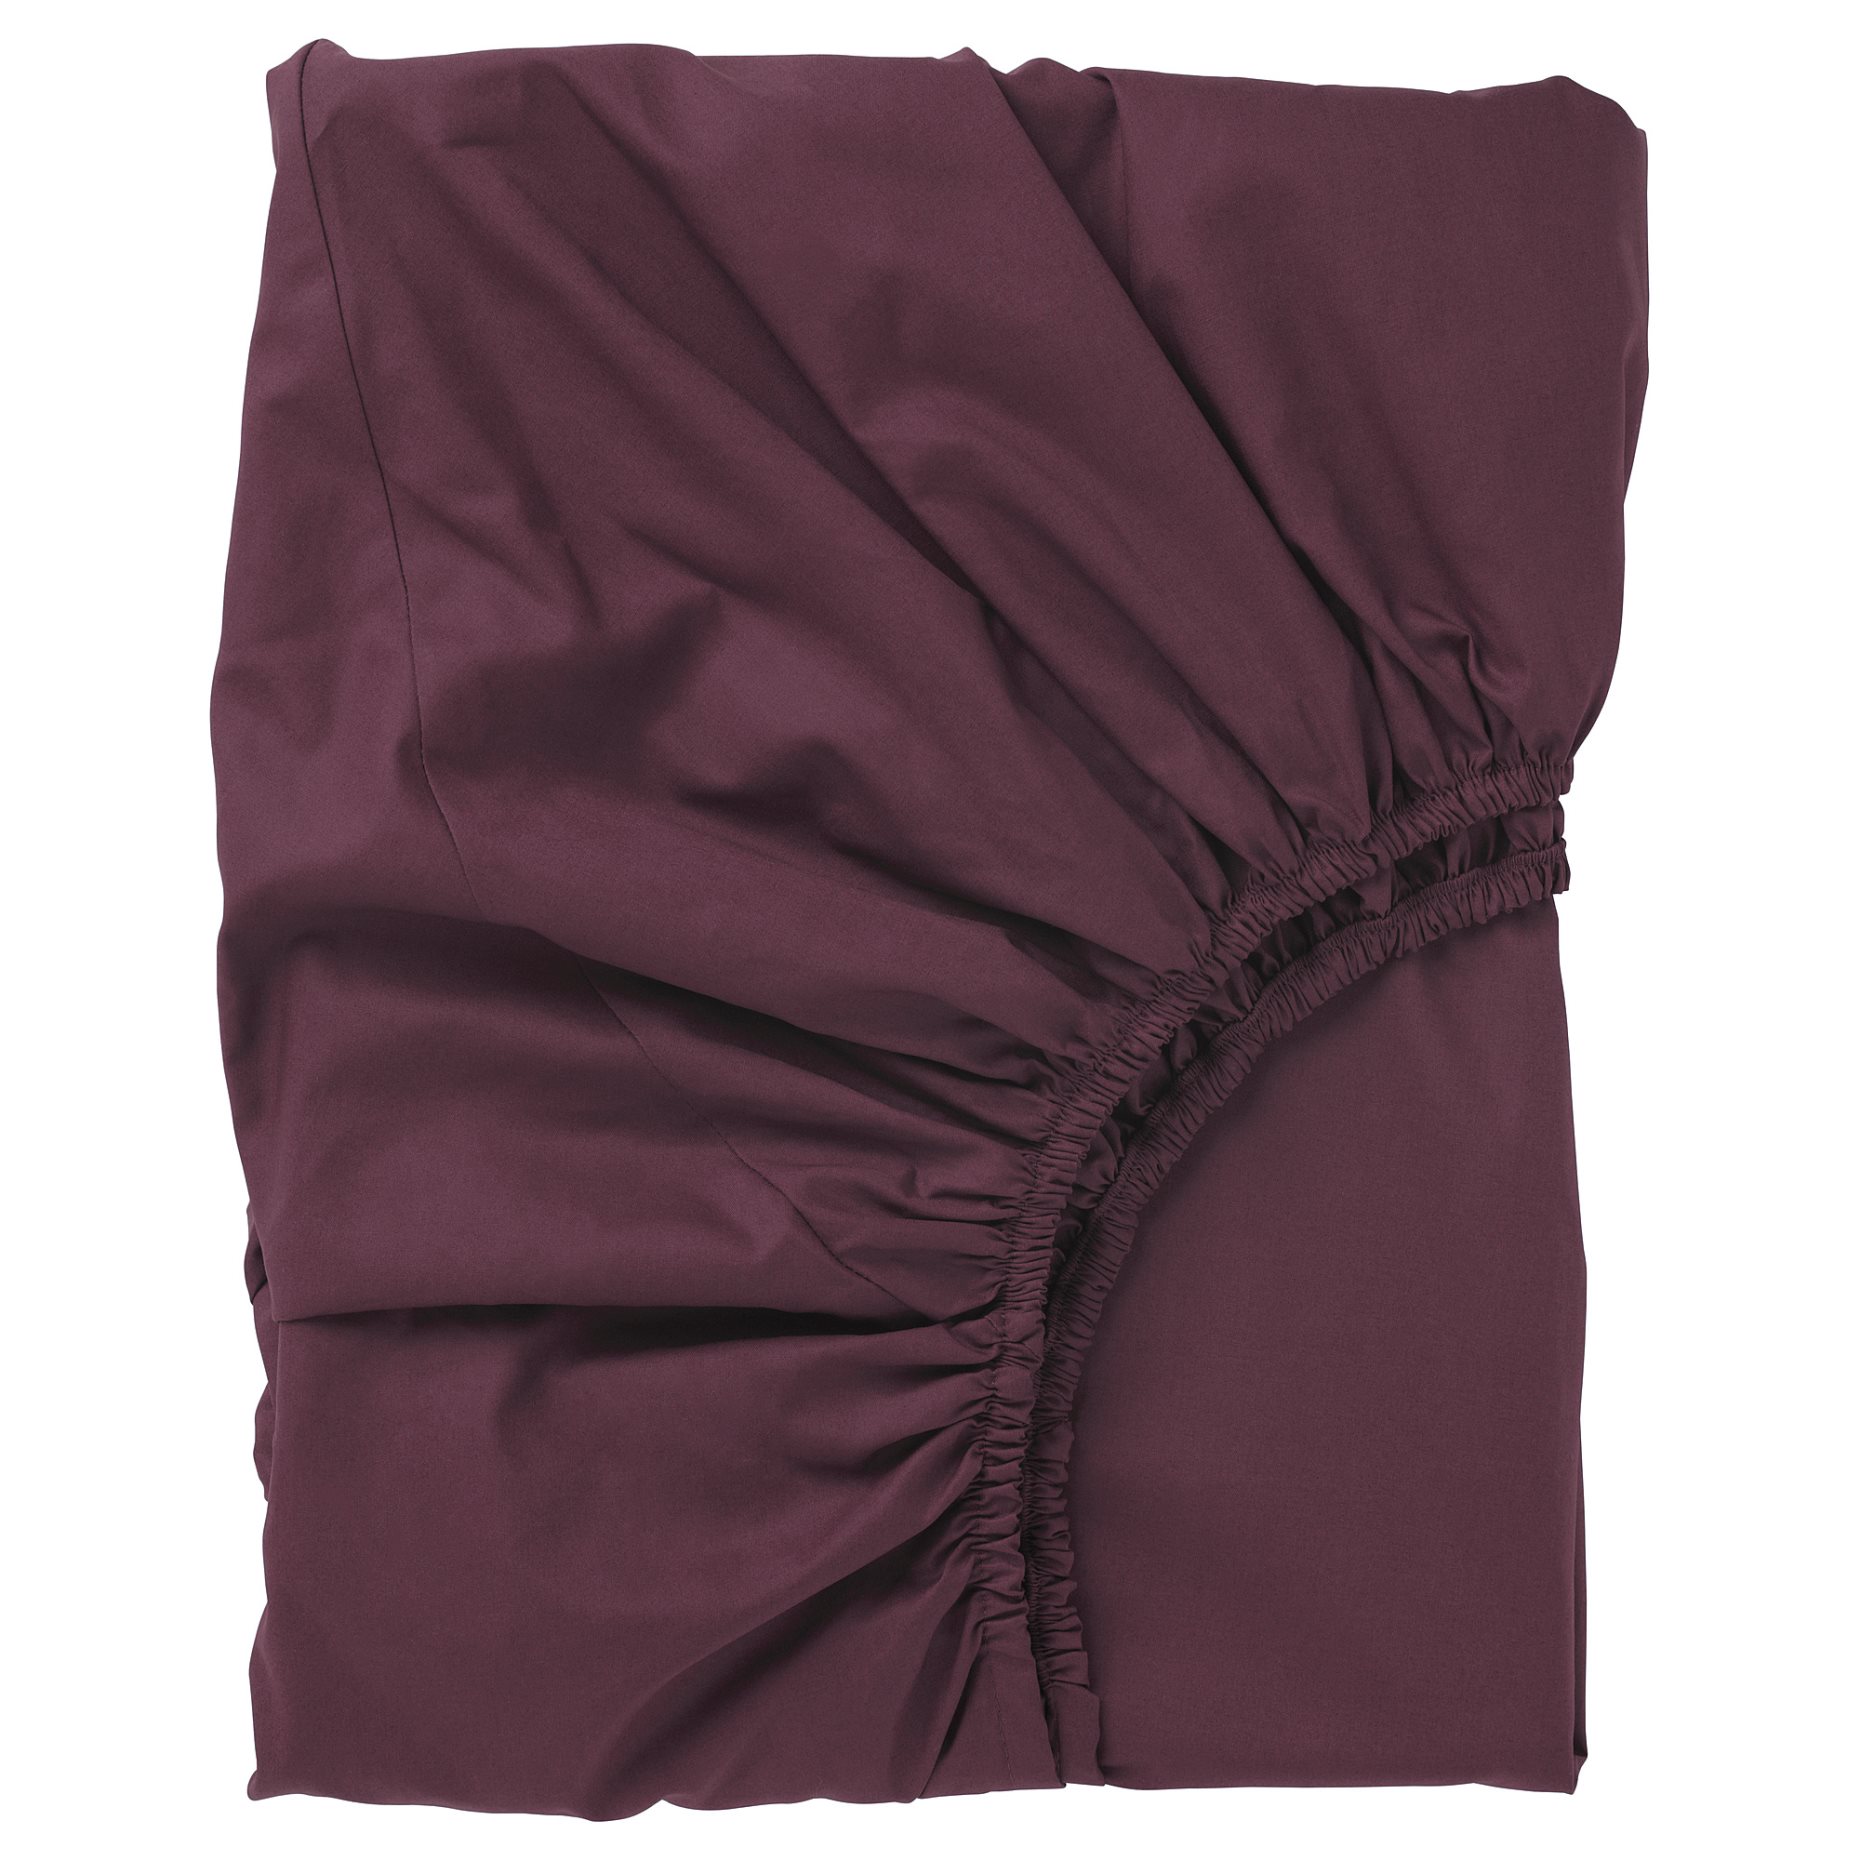 ULLVIDE, fitted sheet, 140x200 cm, 605.580.81